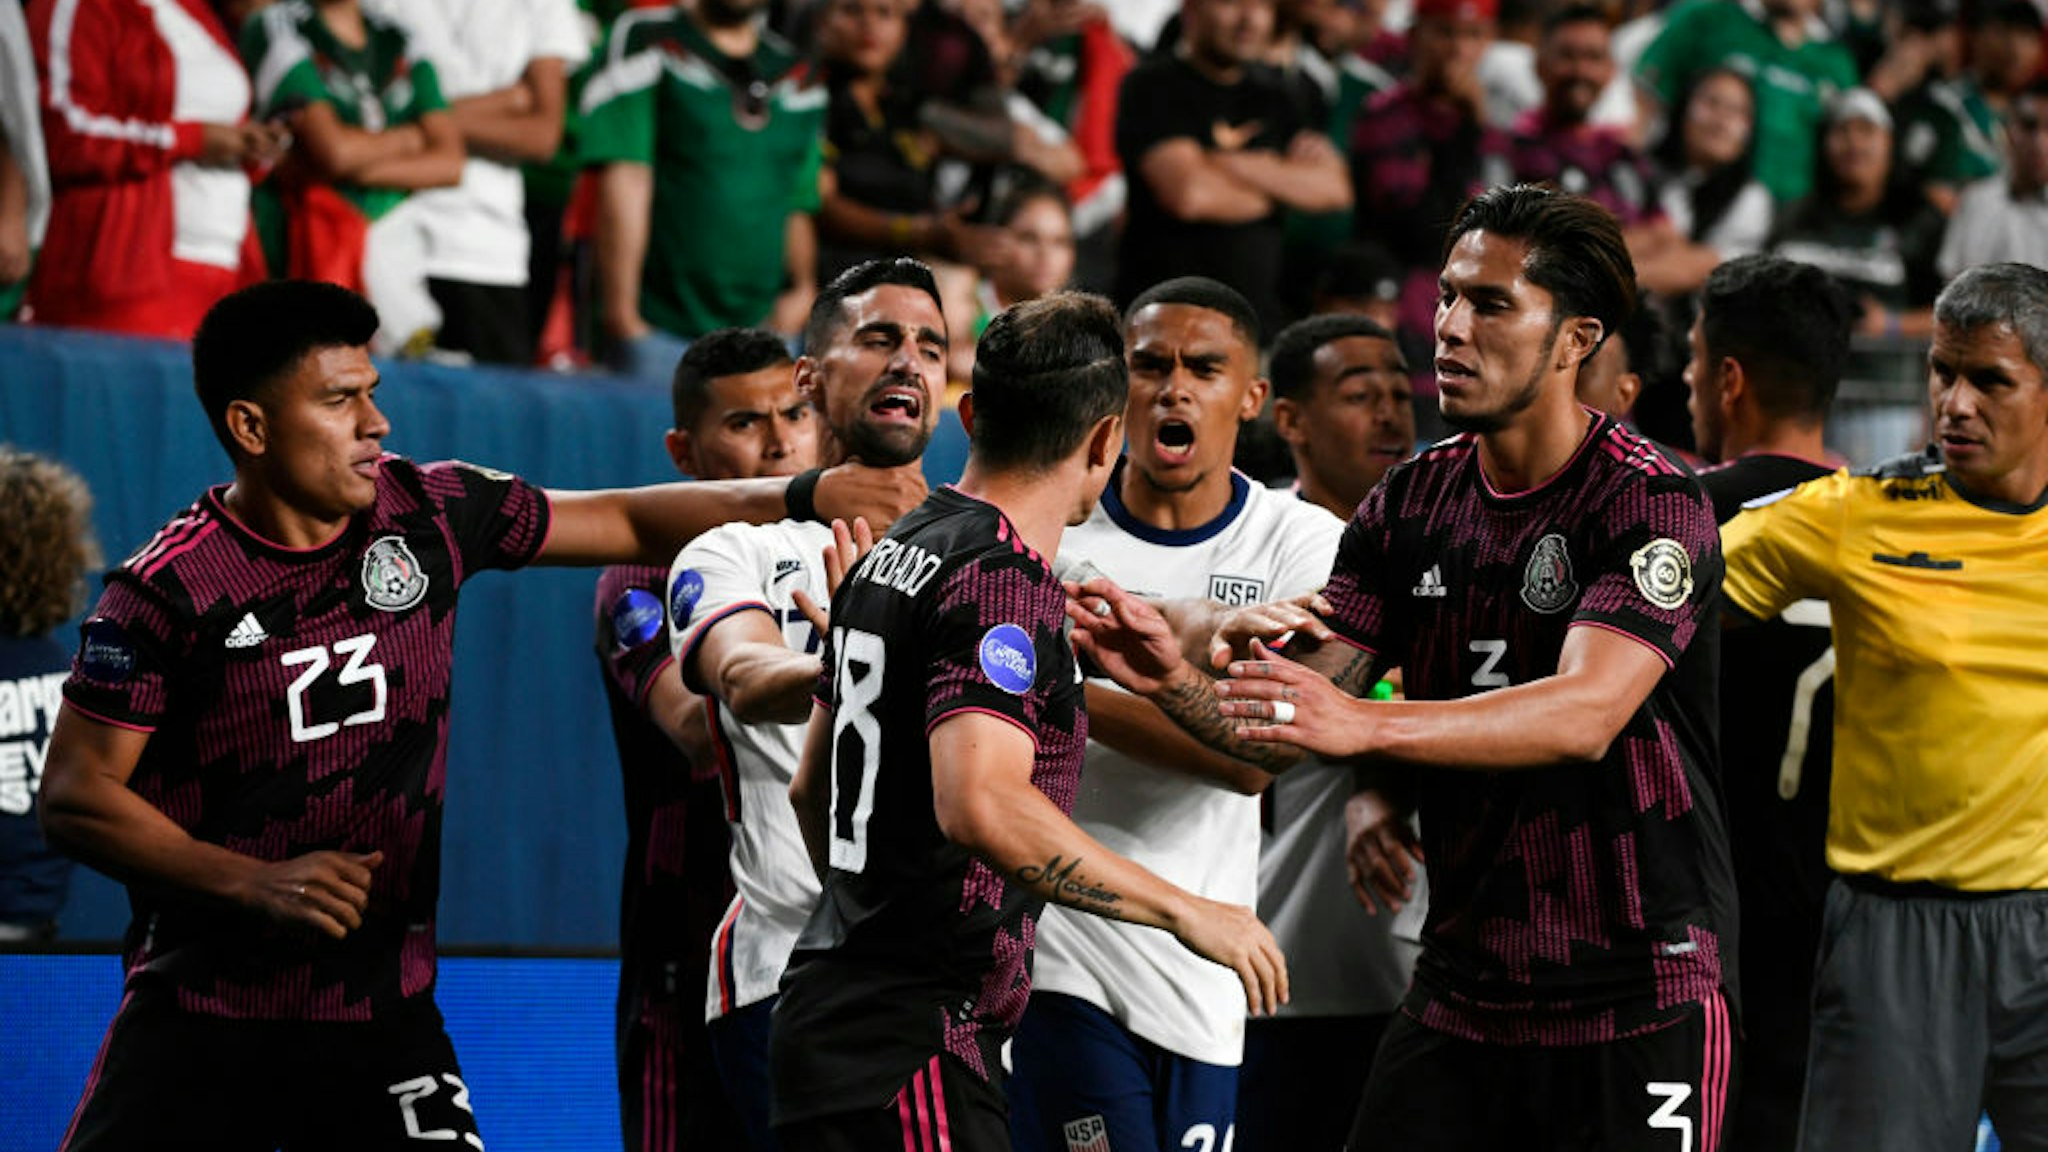 DENVER, COLORADO - MAY 6: Mexico"u2019s #23 Jesus Gallardo, left, puts his hand on the throat of United States"u2019 Midfielder Sebastian Lletget, #17 as Midfielder Andres Guardado, #18, center, gets in a shouting match with United States"u2019 Defender Reggie Cannon, #20 and Mexico"u2019s Carlos Salcedo, #3, tries to keep the peace during the championship game at the Concacaf Nations League Finals at Empower Field at Mile High on June 6, 2021 in Denver, Colorado. The United States beat Mexico 3 to 2 in a heated game that lasted over two hours. (Photo by Helen H. Richardson/MediaNews Group/The Denver Post via Getty Images)